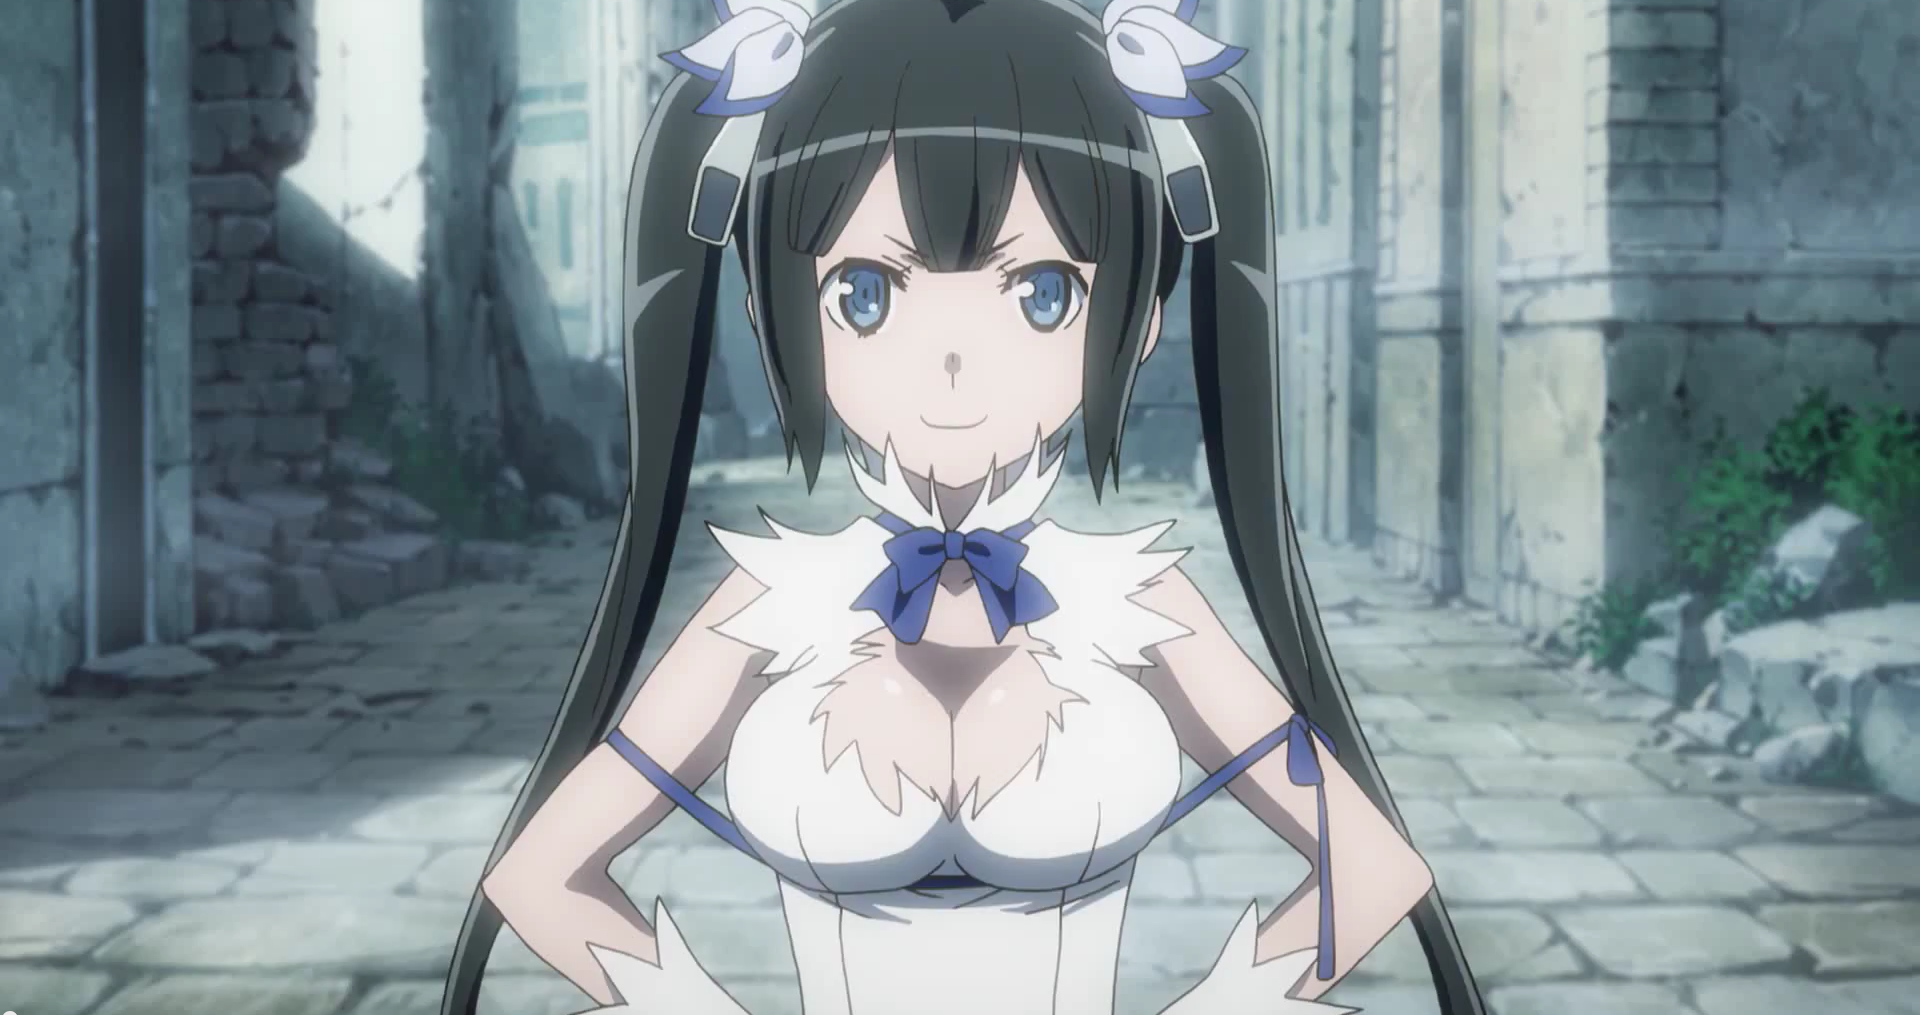 Is It Wrong to Try to Pick Up Girls in a Dungeon? (season 2) - Wikipedia